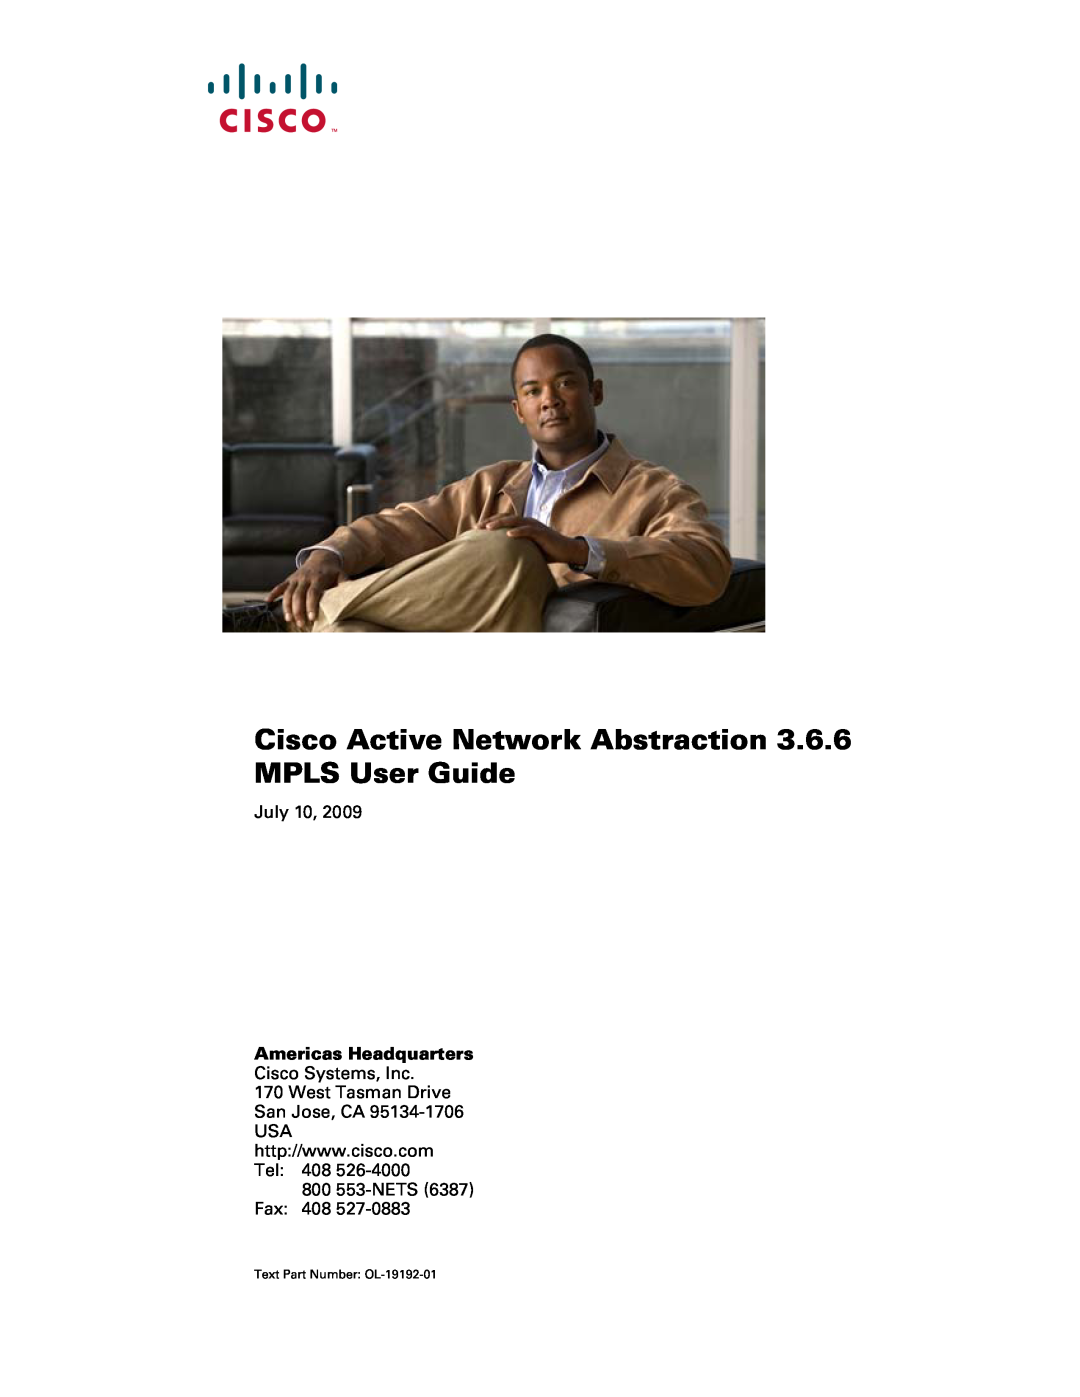 Cisco Systems manual Americas Headquarters, Cisco Active Network Abstraction 3.6.6 MPLS User Guide, July 10 